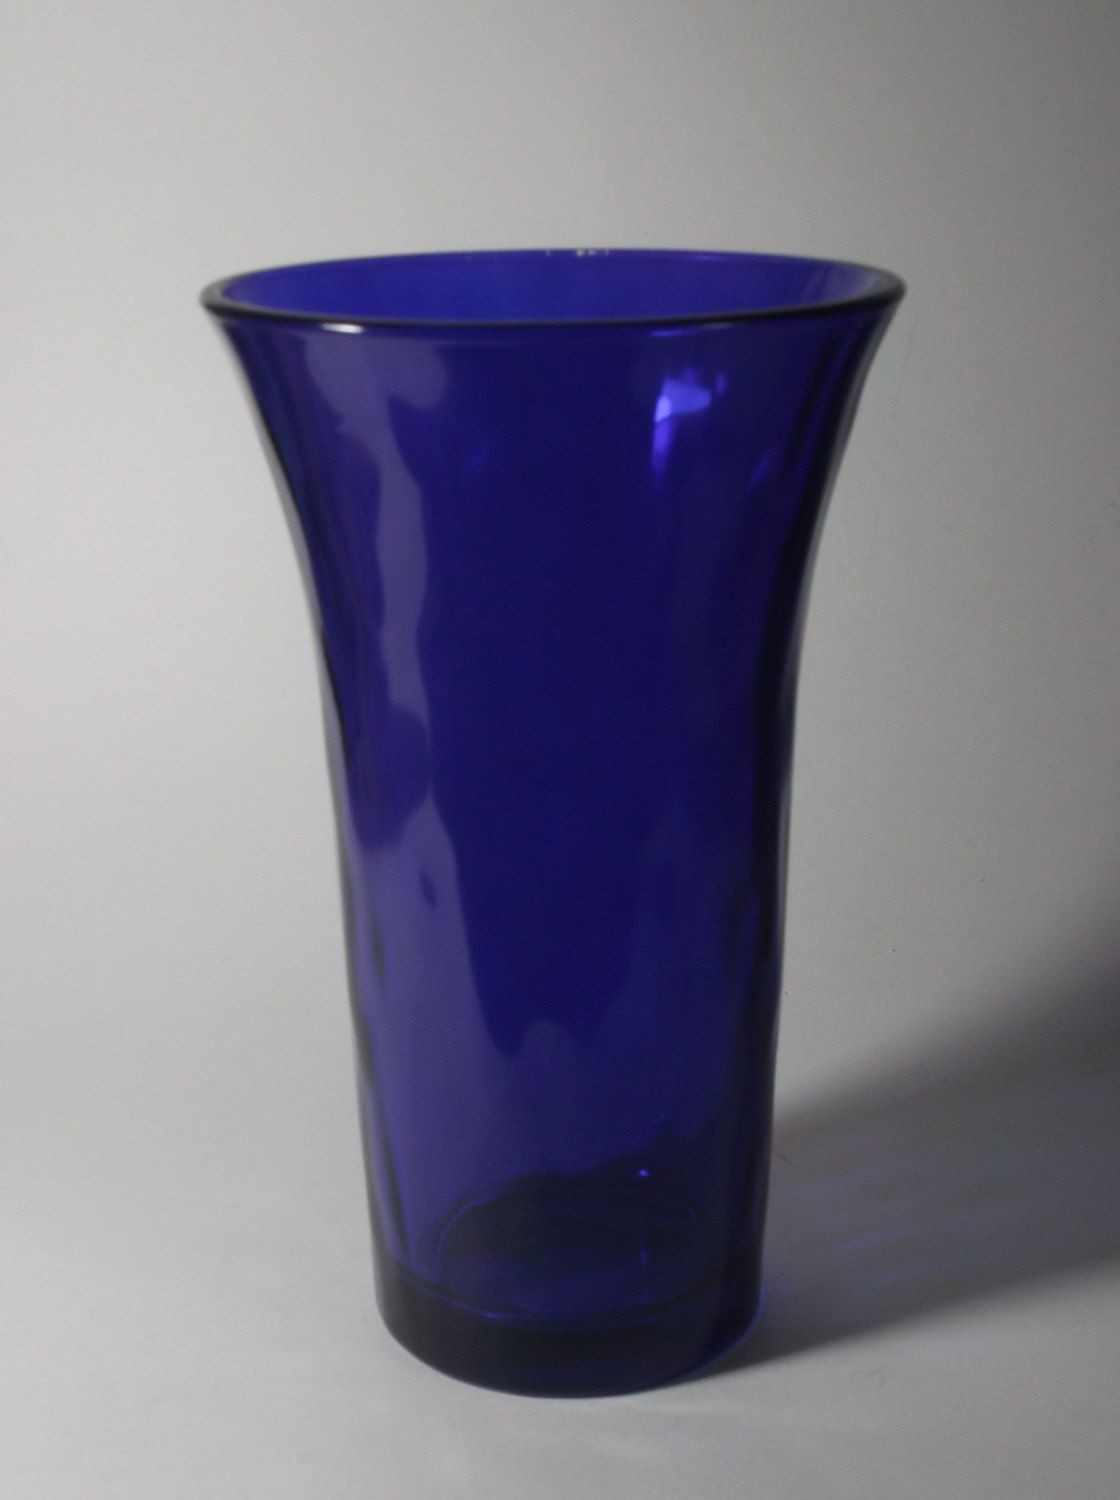 29 attractive Blue Plastic Vase 2024 free download blue plastic vase of libbey glass cobalt blue vase by treasures1st on etsy cobalt blue with libbey glass cobalt blue vase by treasures1st on etsy cobalt blue glass pinterest cobalt blue coba